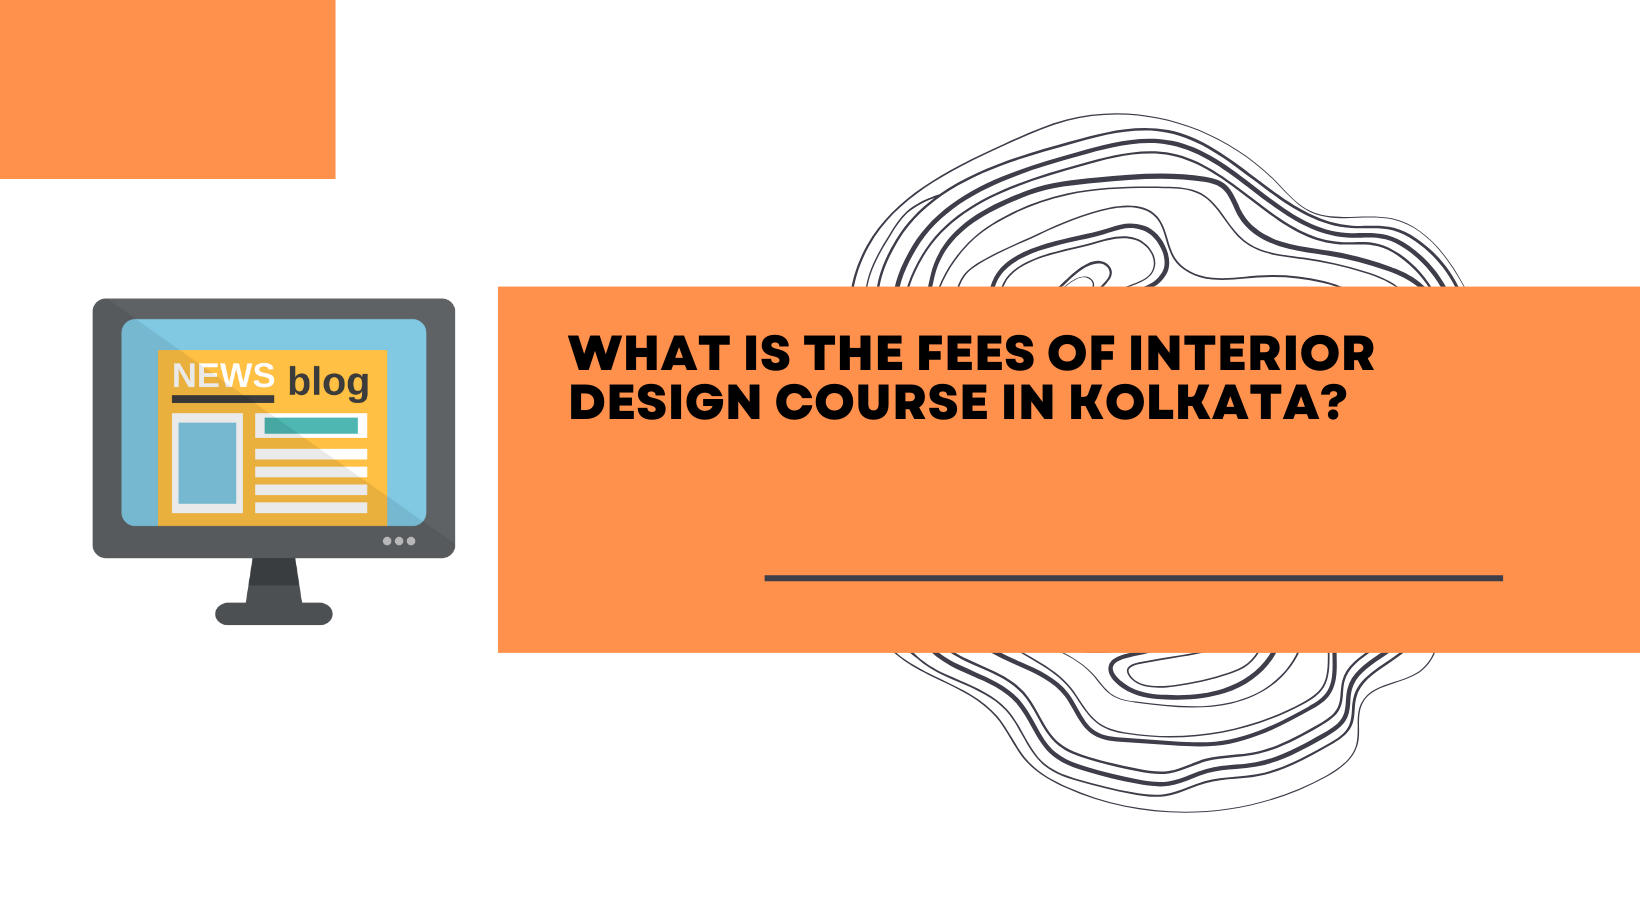 What is the fees of interior design course in Kolkata?